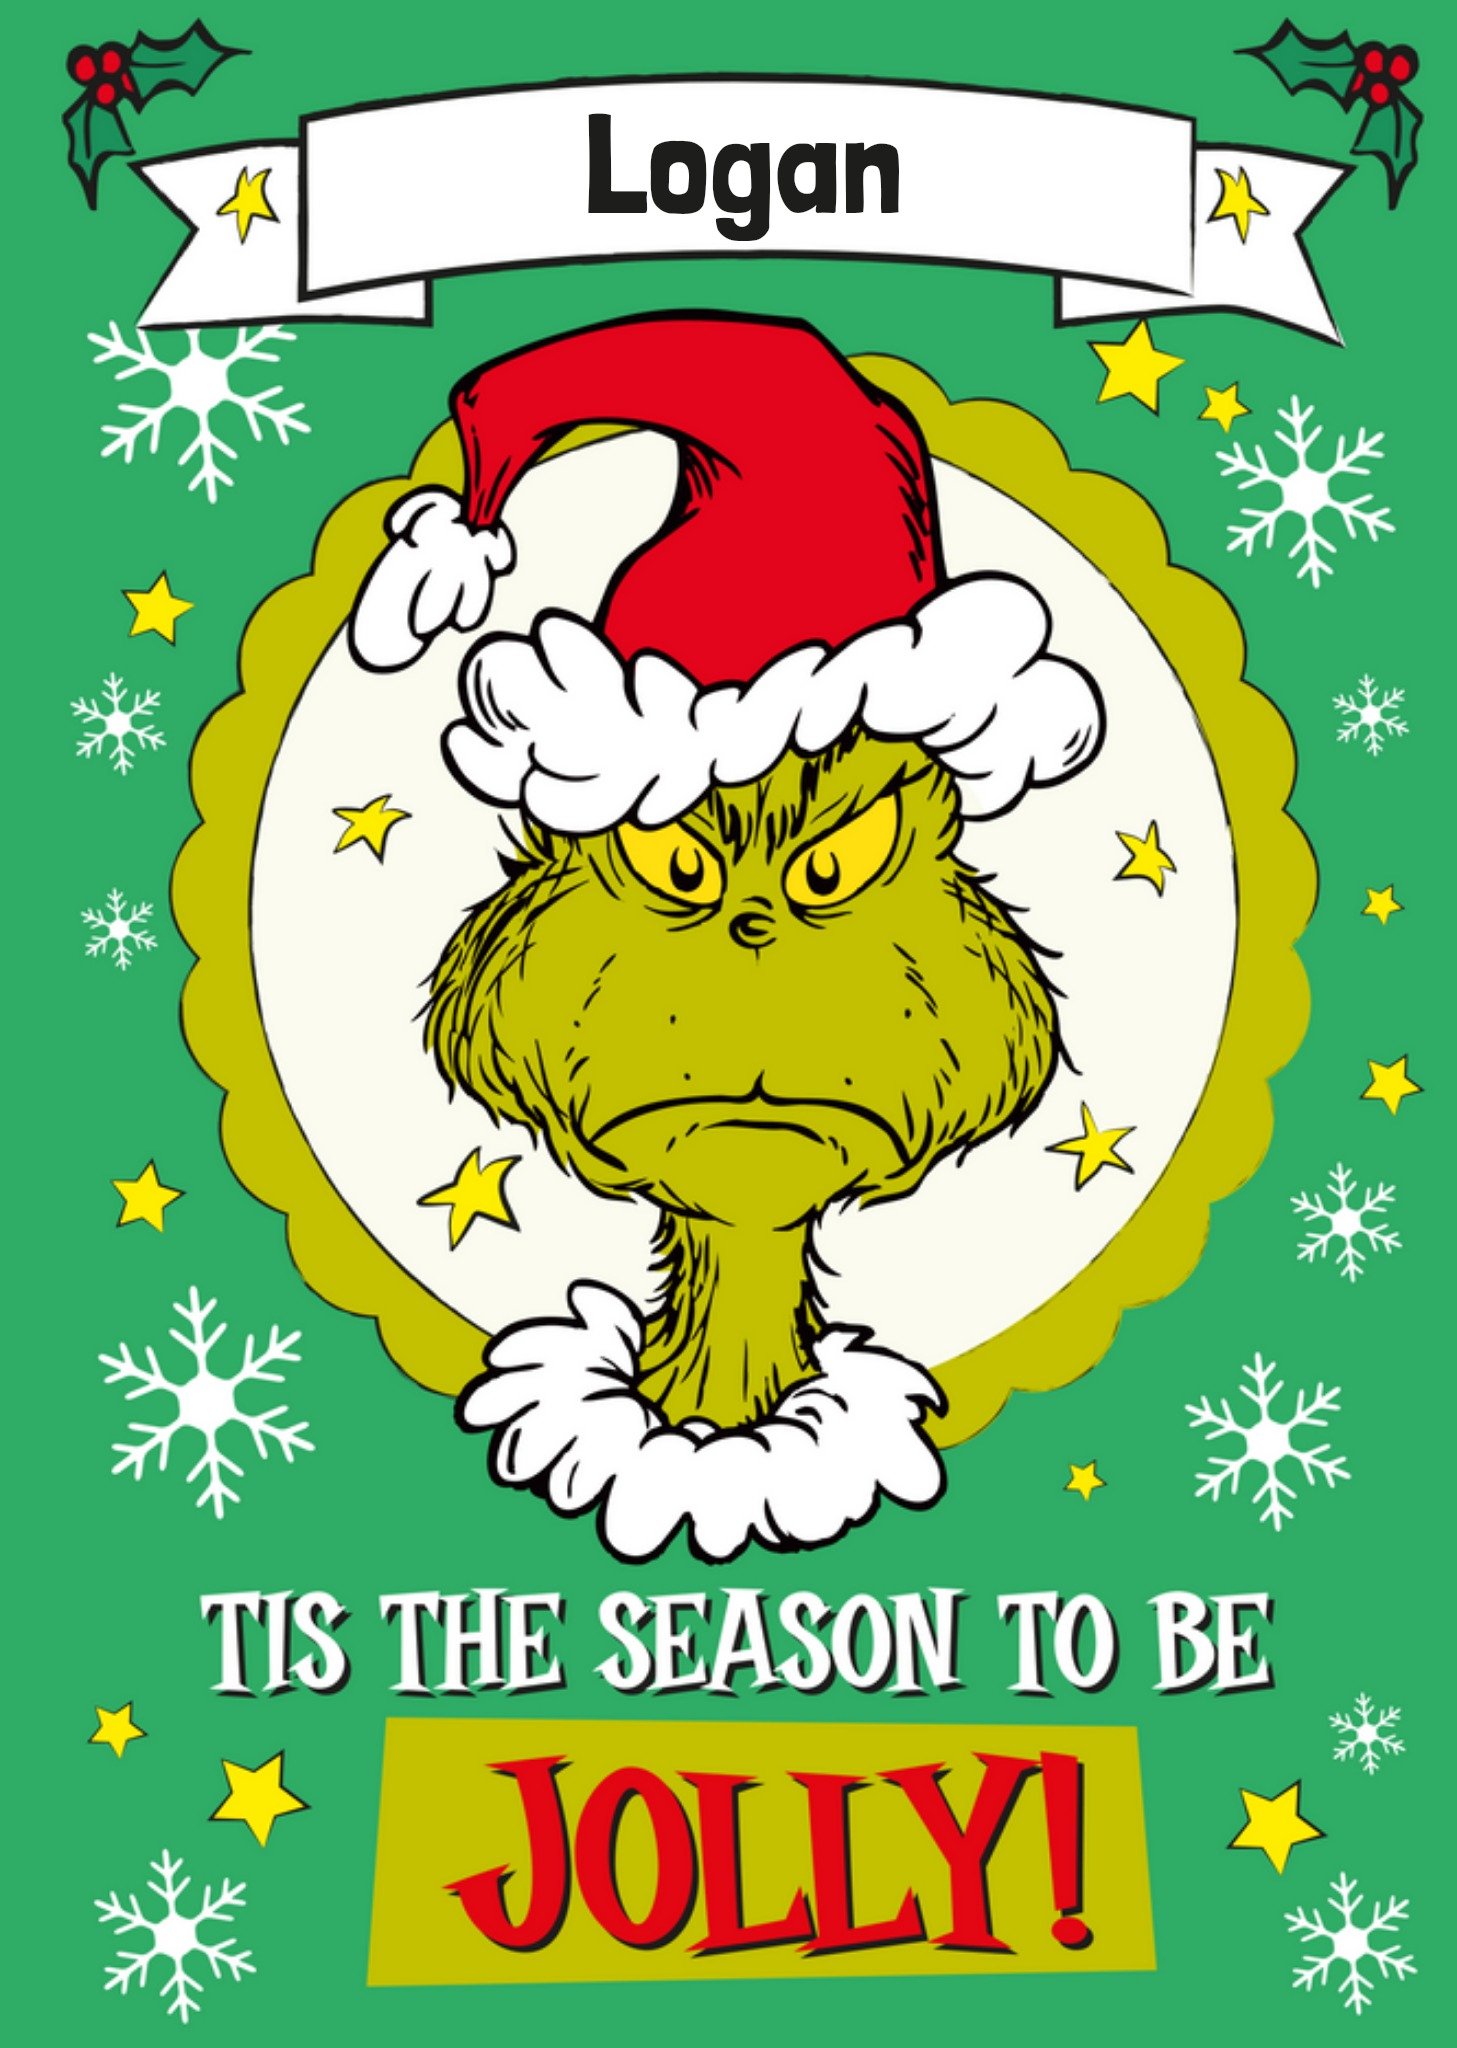 Moonpig The Grinch Tis The Season To Be Jolly Christmas Card, Large